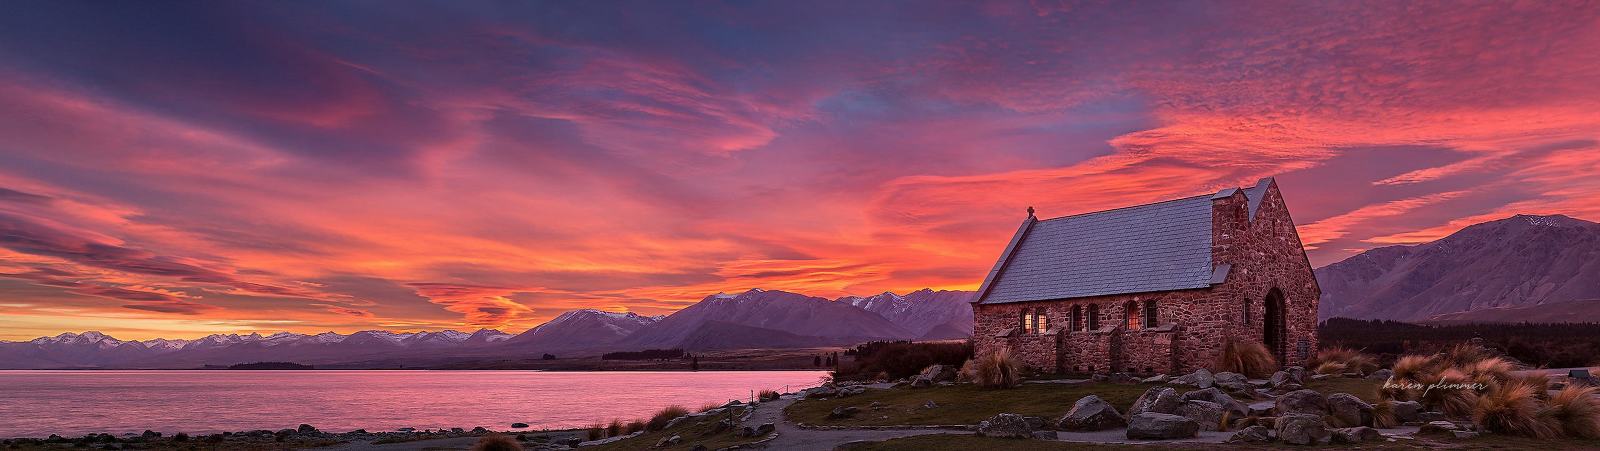 The Church Of the Good Shepherd at Lake Tekapo, New Zealand with the sky exploding with colour at sunrise.